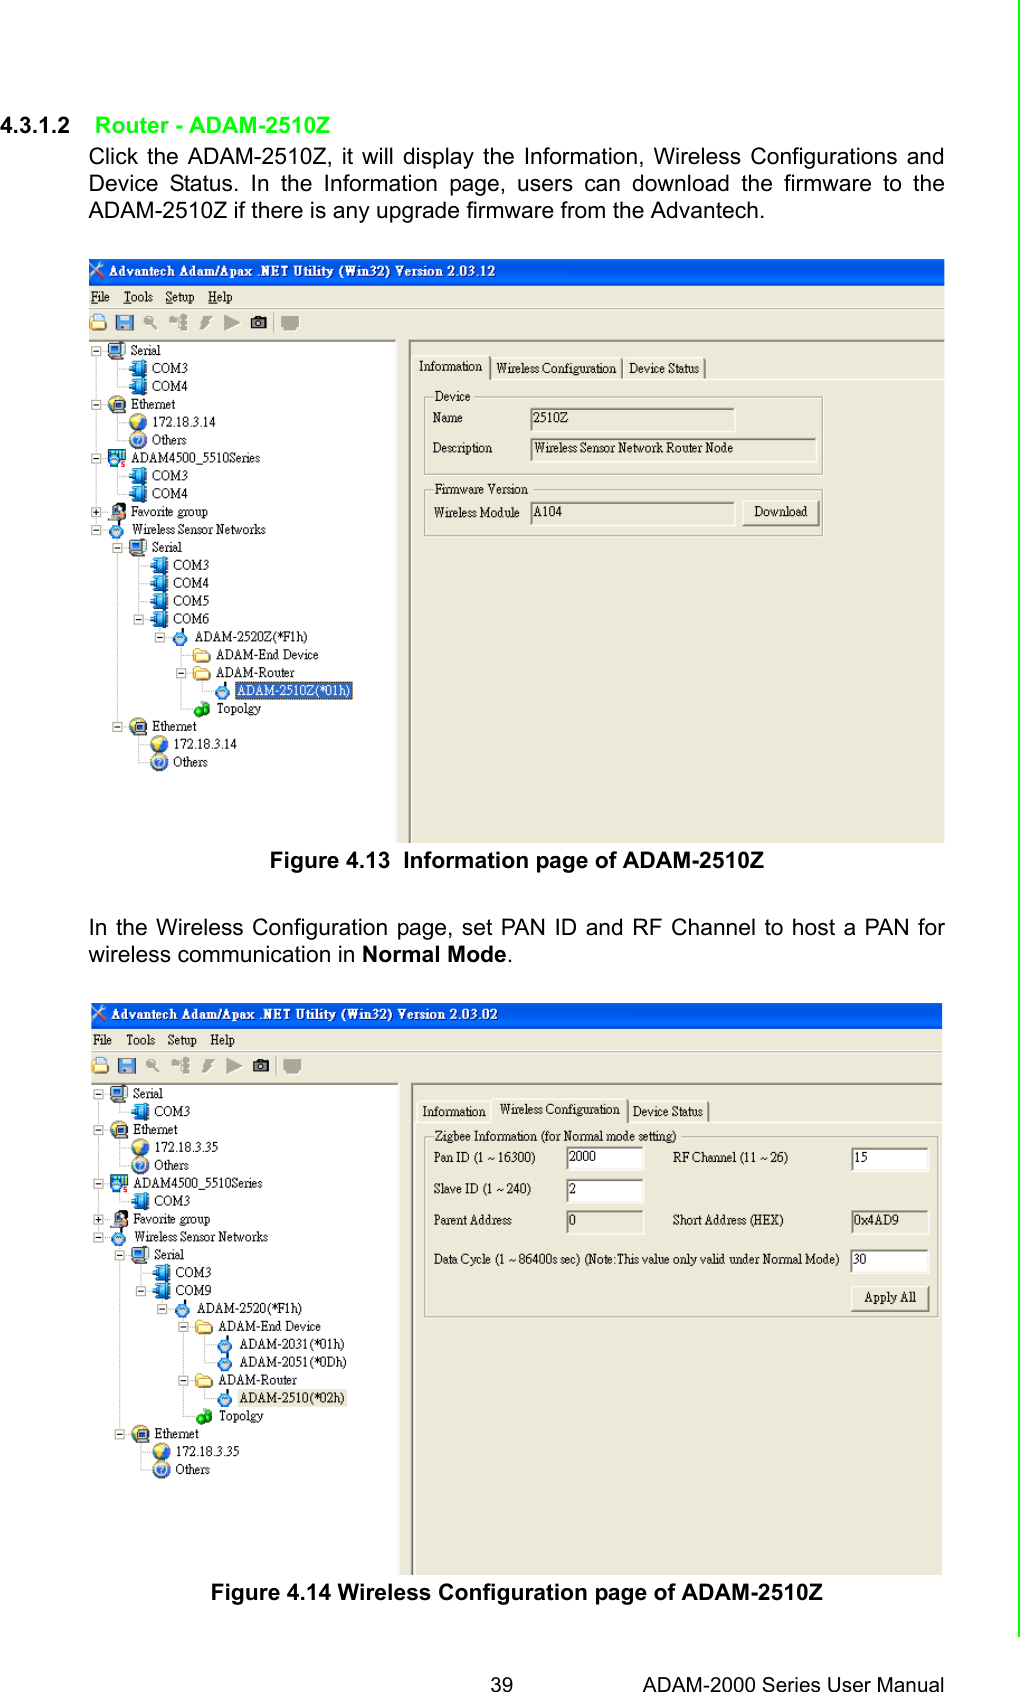 39 ADAM-2000 Series User ManualChapter 4 Software Configuration Guide4.3.1.2  Router - ADAM-2510ZClick the ADAM-2510Z, it will display the Information, Wireless Configurations andDevice Status. In the Information page, users can download the firmware to theADAM-2510Z if there is any upgrade firmware from the Advantech.Figure 4.13  Information page of ADAM-2510ZIn the Wireless Configuration page, set PAN ID and RF Channel to host a PAN forwireless communication in Normal Mode.Figure 4.14 Wireless Configuration page of ADAM-2510Z